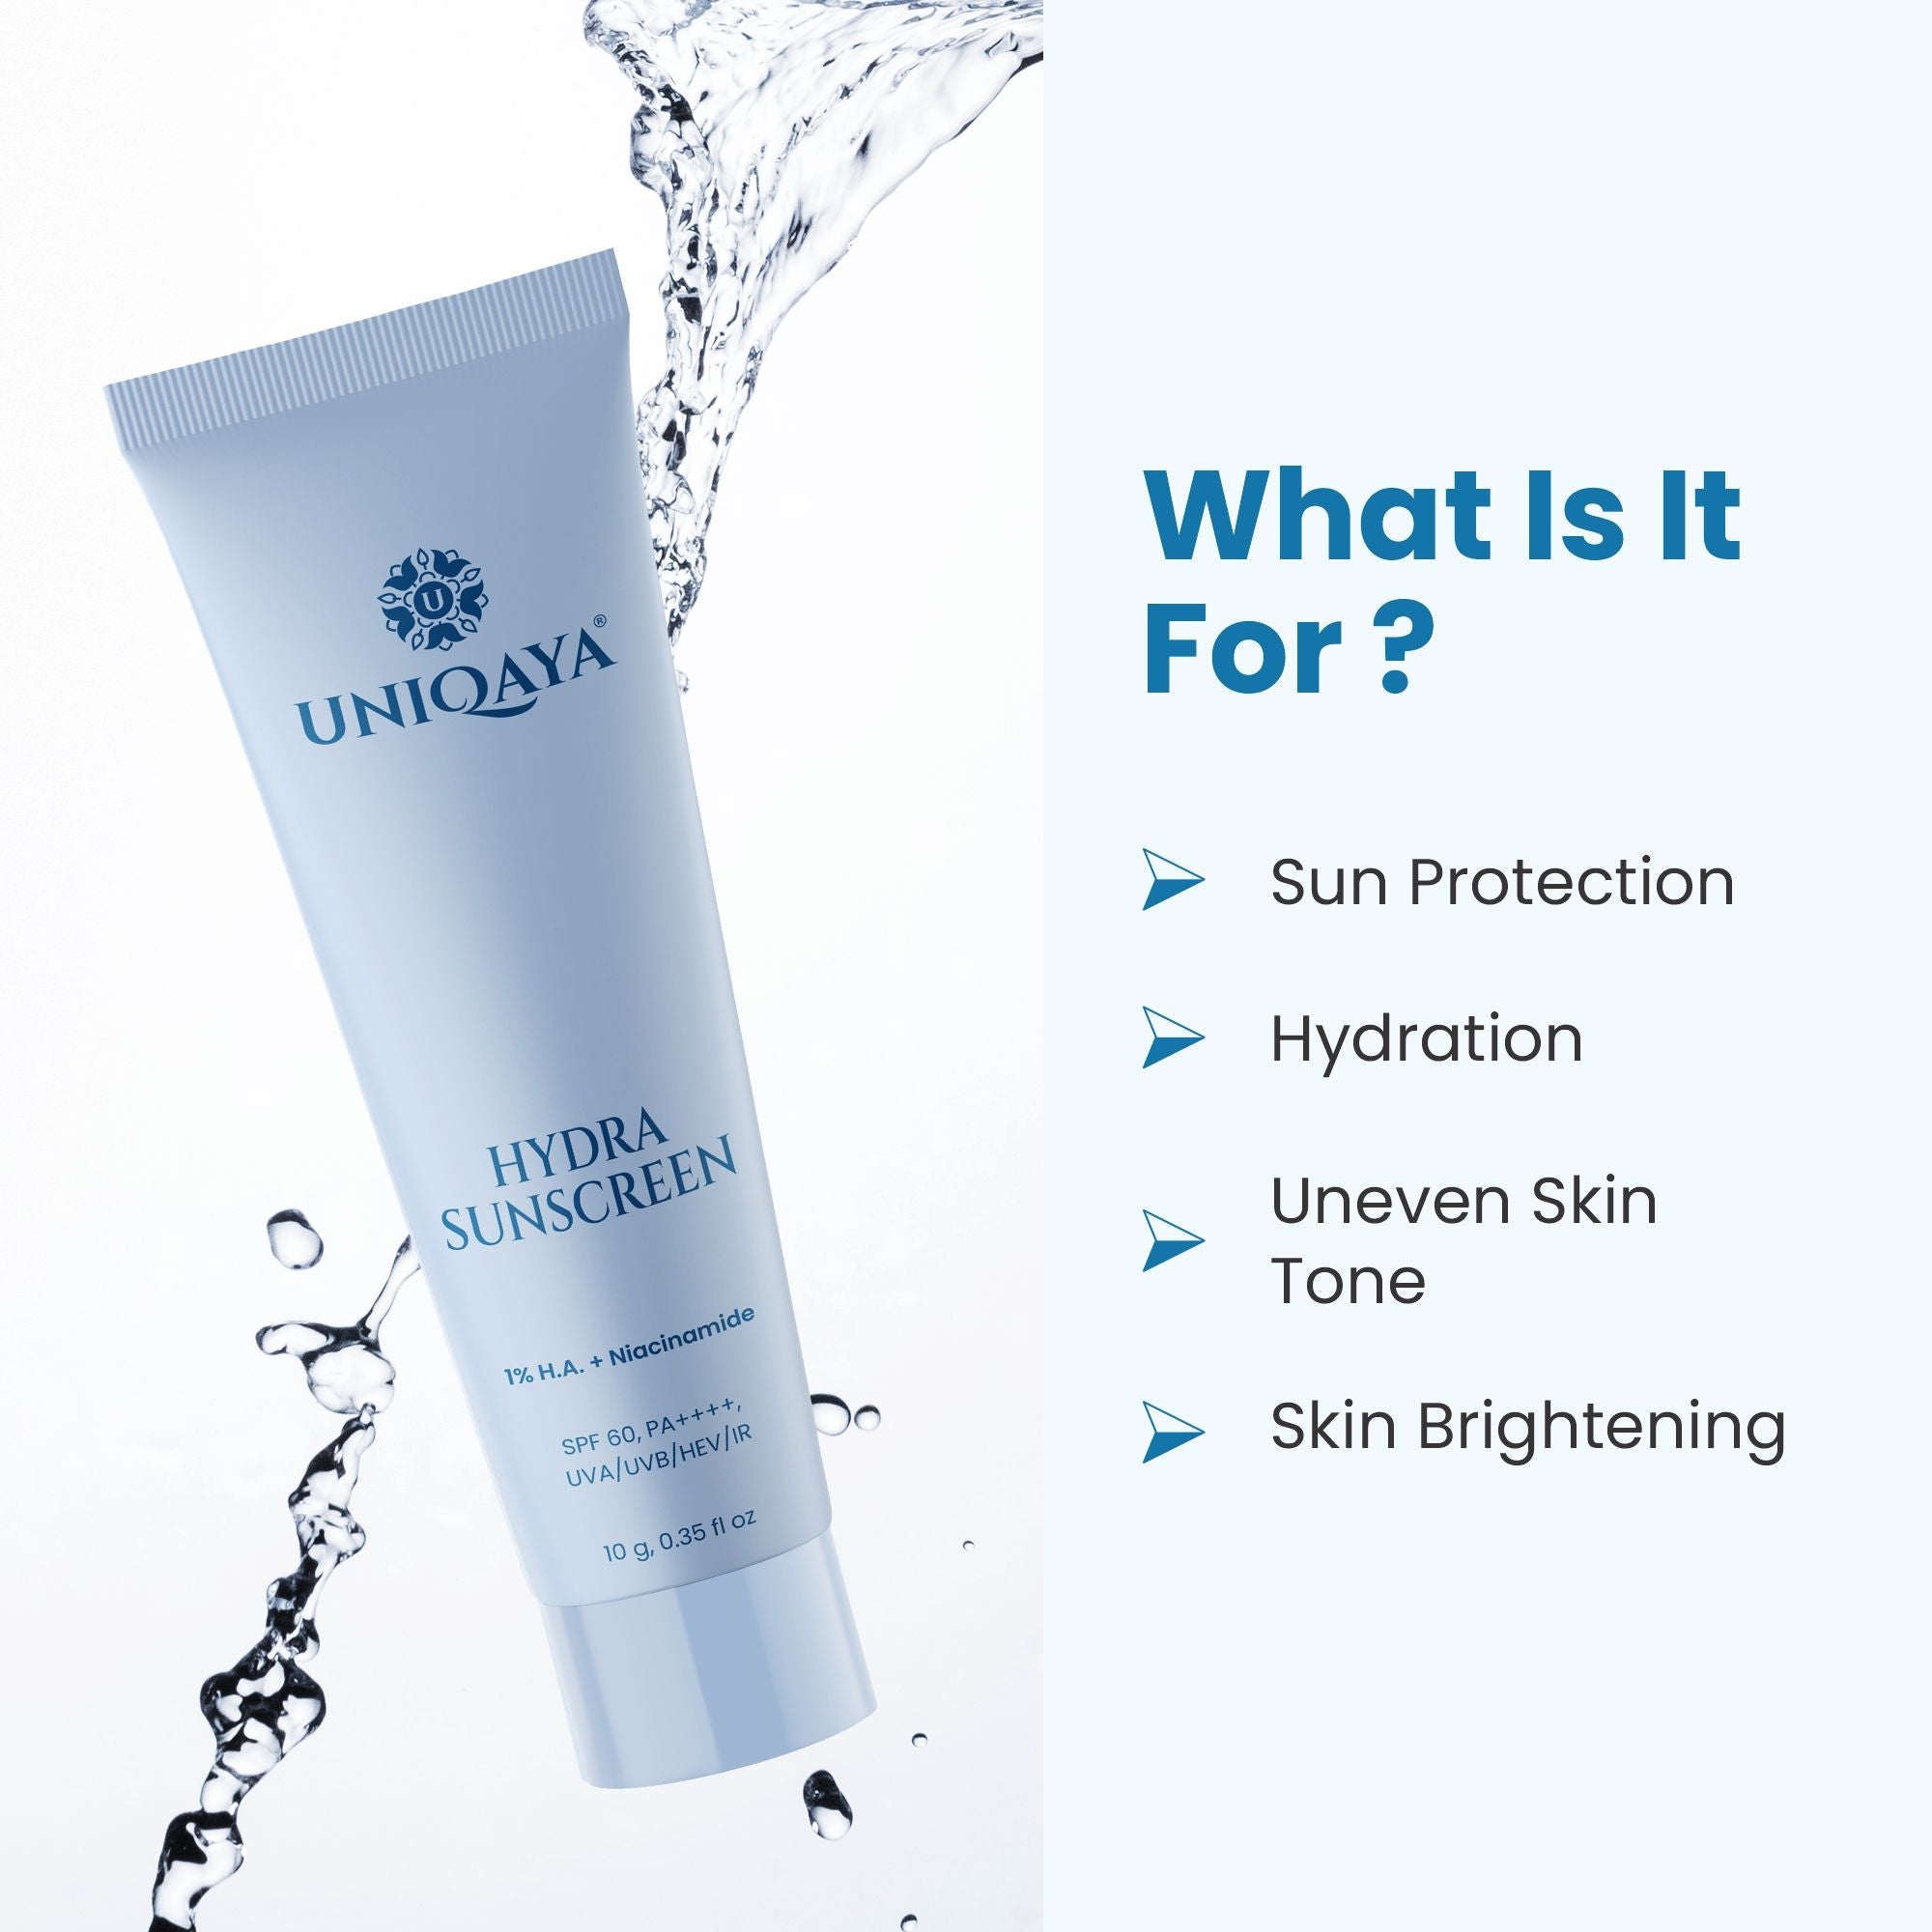 Uniqaya Hydra Sunscreen 10g What is it For?